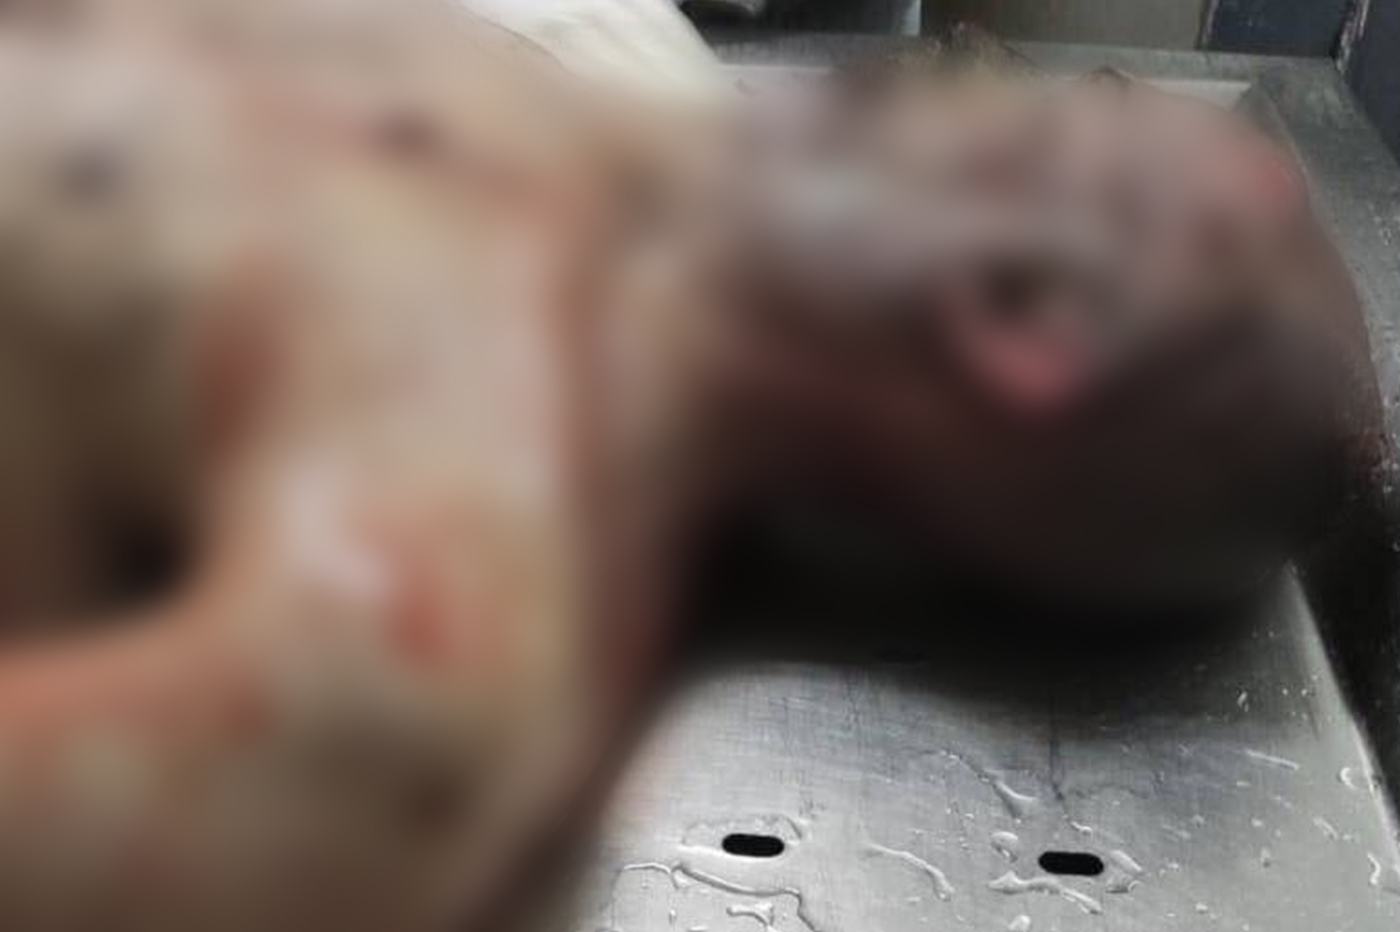 A blurred image of Ayman Muhammad Ali Hadhoud's body showing severe bruising on his face